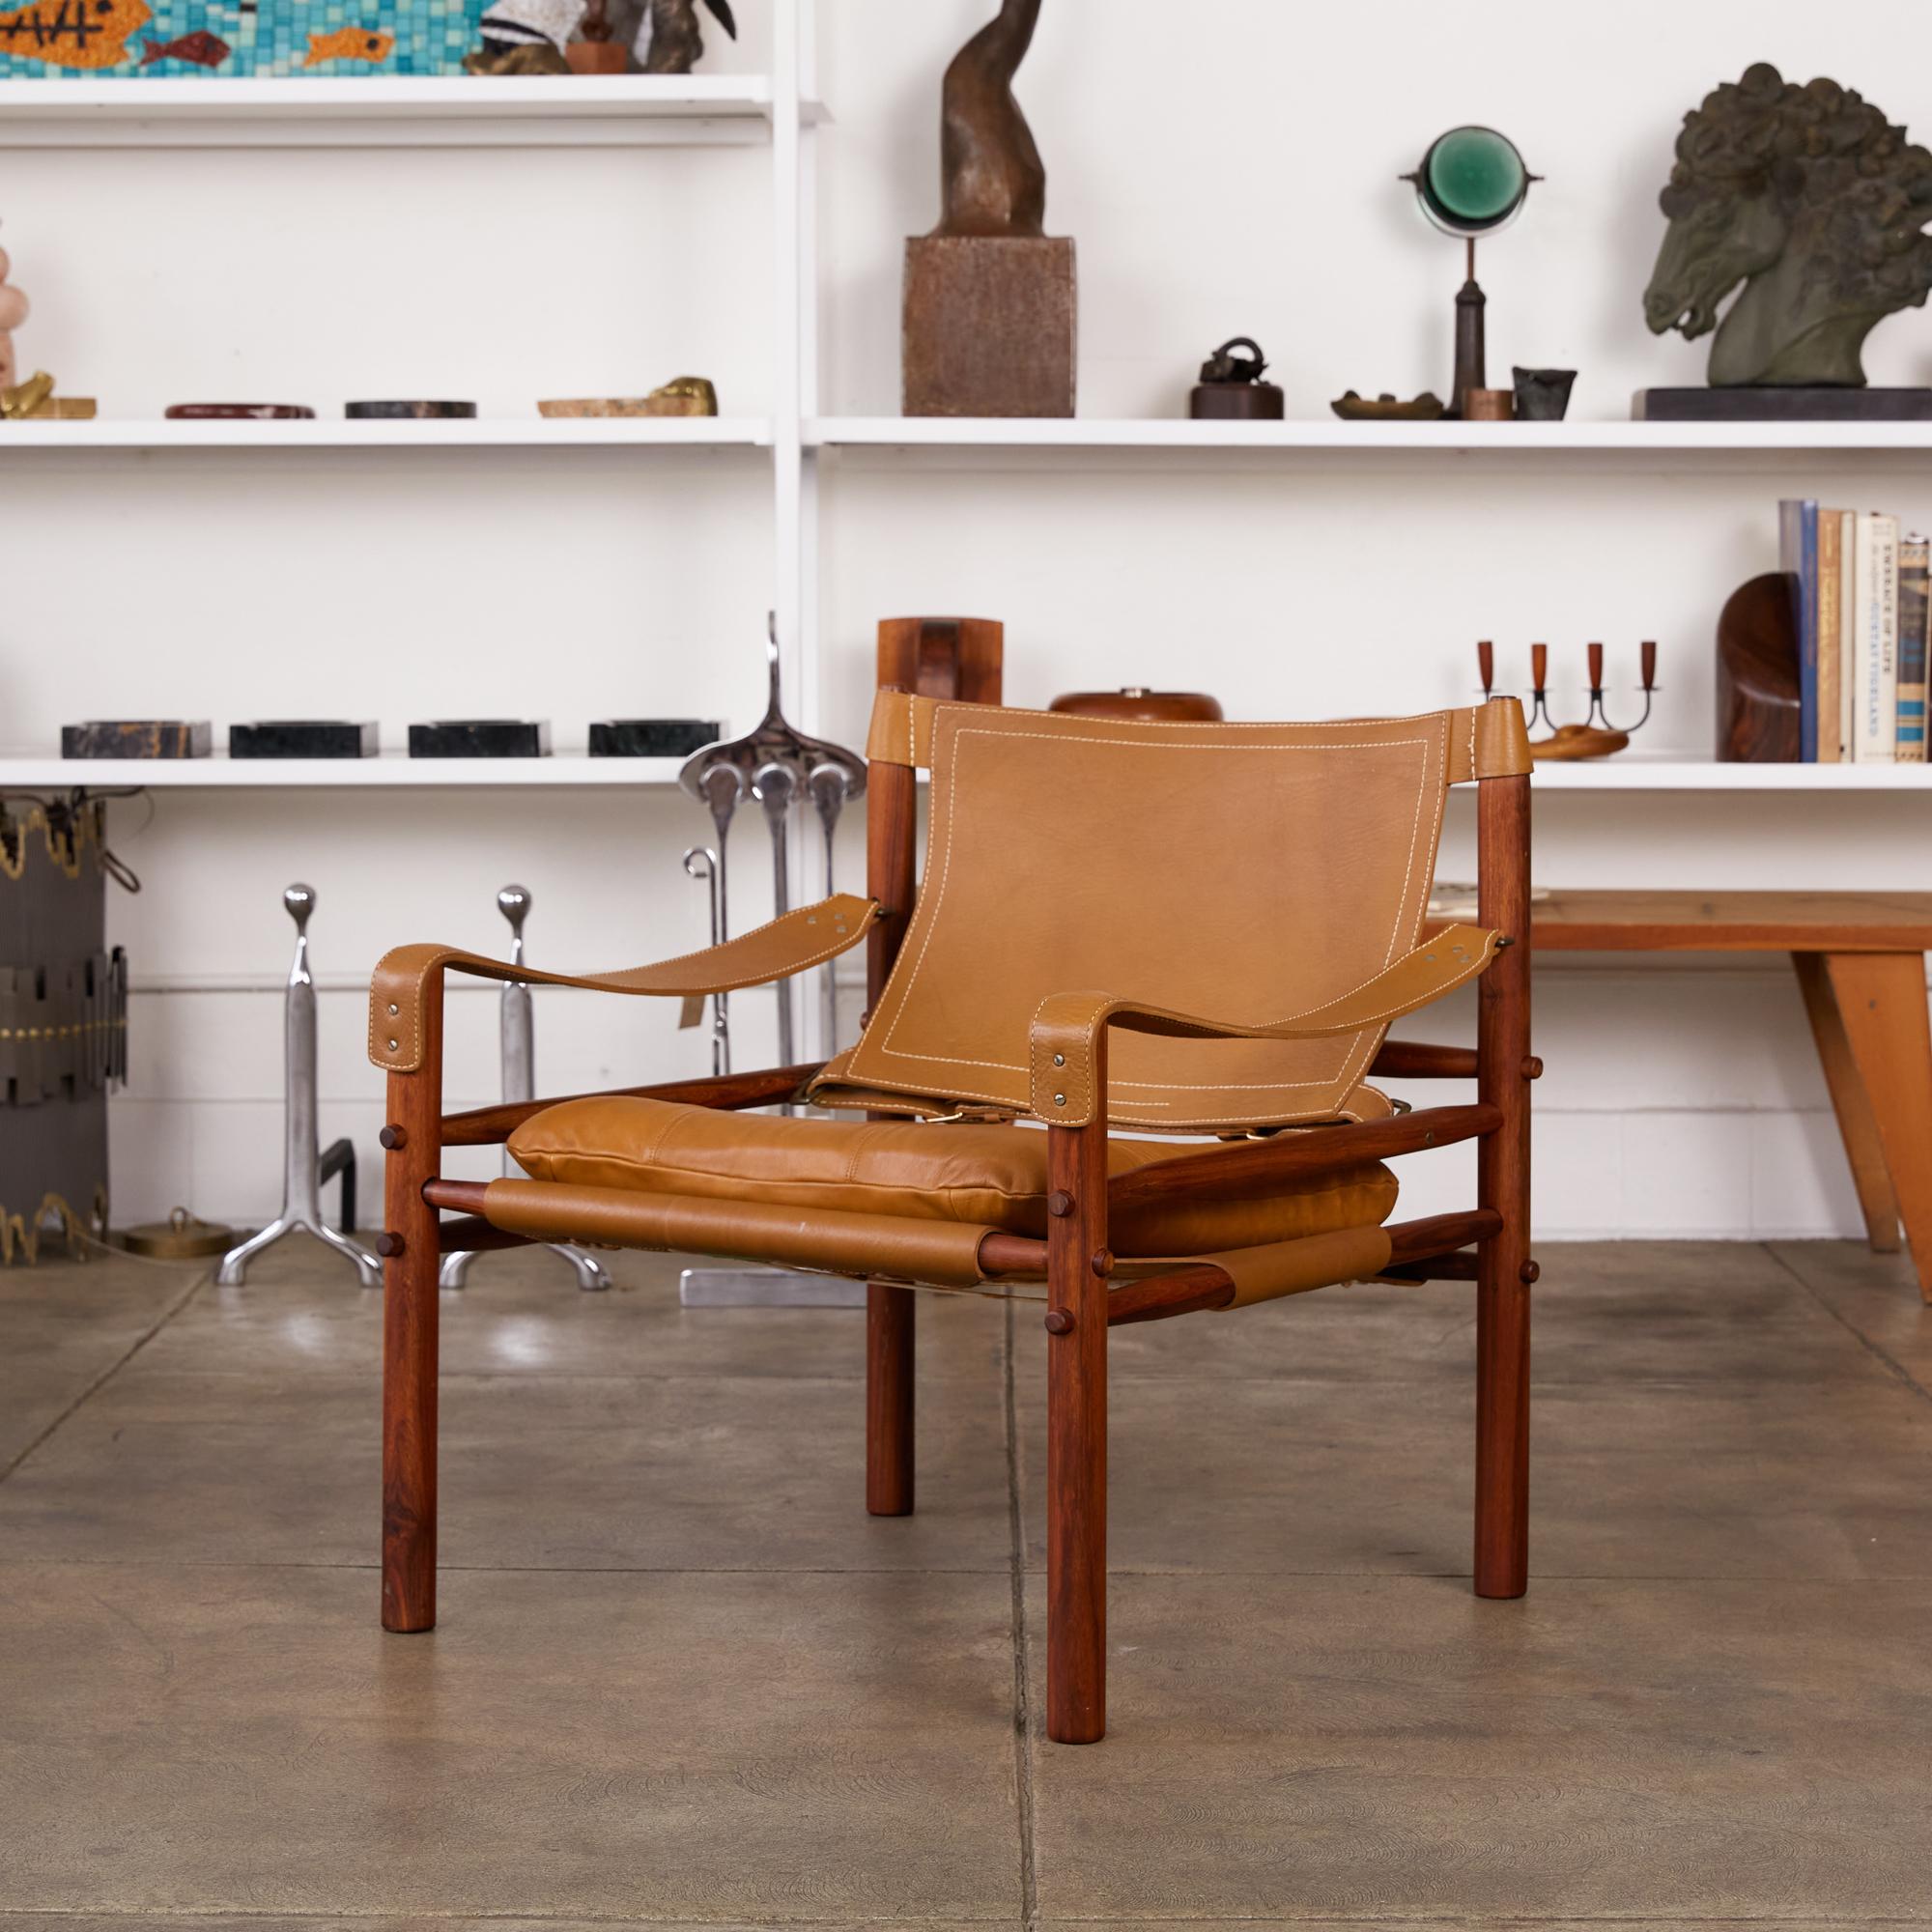 A 'Sirocco' safari chair designed by Arne Norell in 1966 and produced by Scanform in Colombia, a company licensed to manufacture the Sirocco chair for export to the US. This example features a solid rosewood frame strapped together by